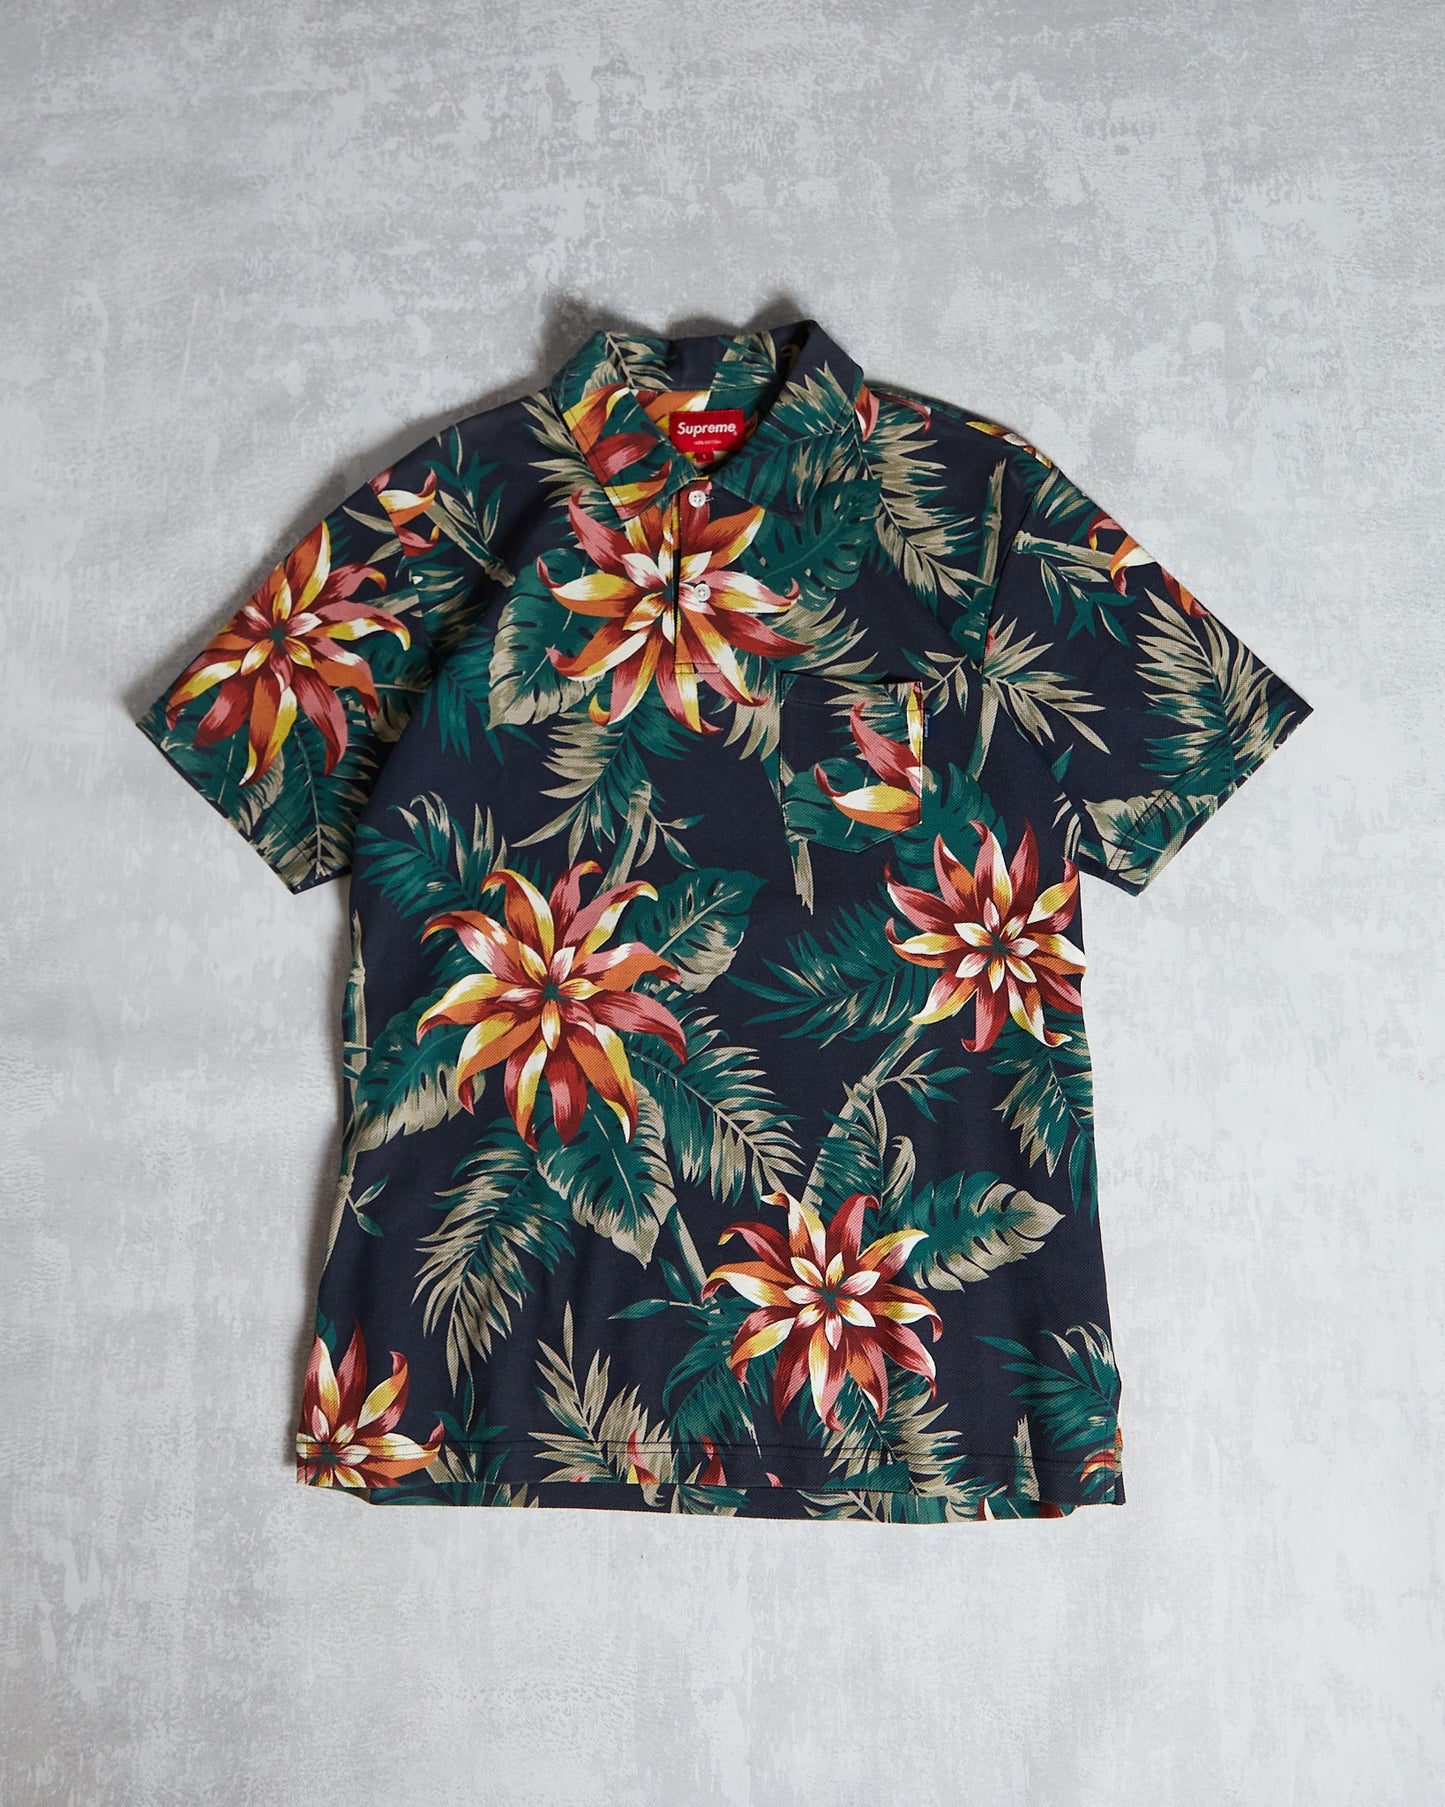 Supreme Floral Polo 2012 (Large) navy